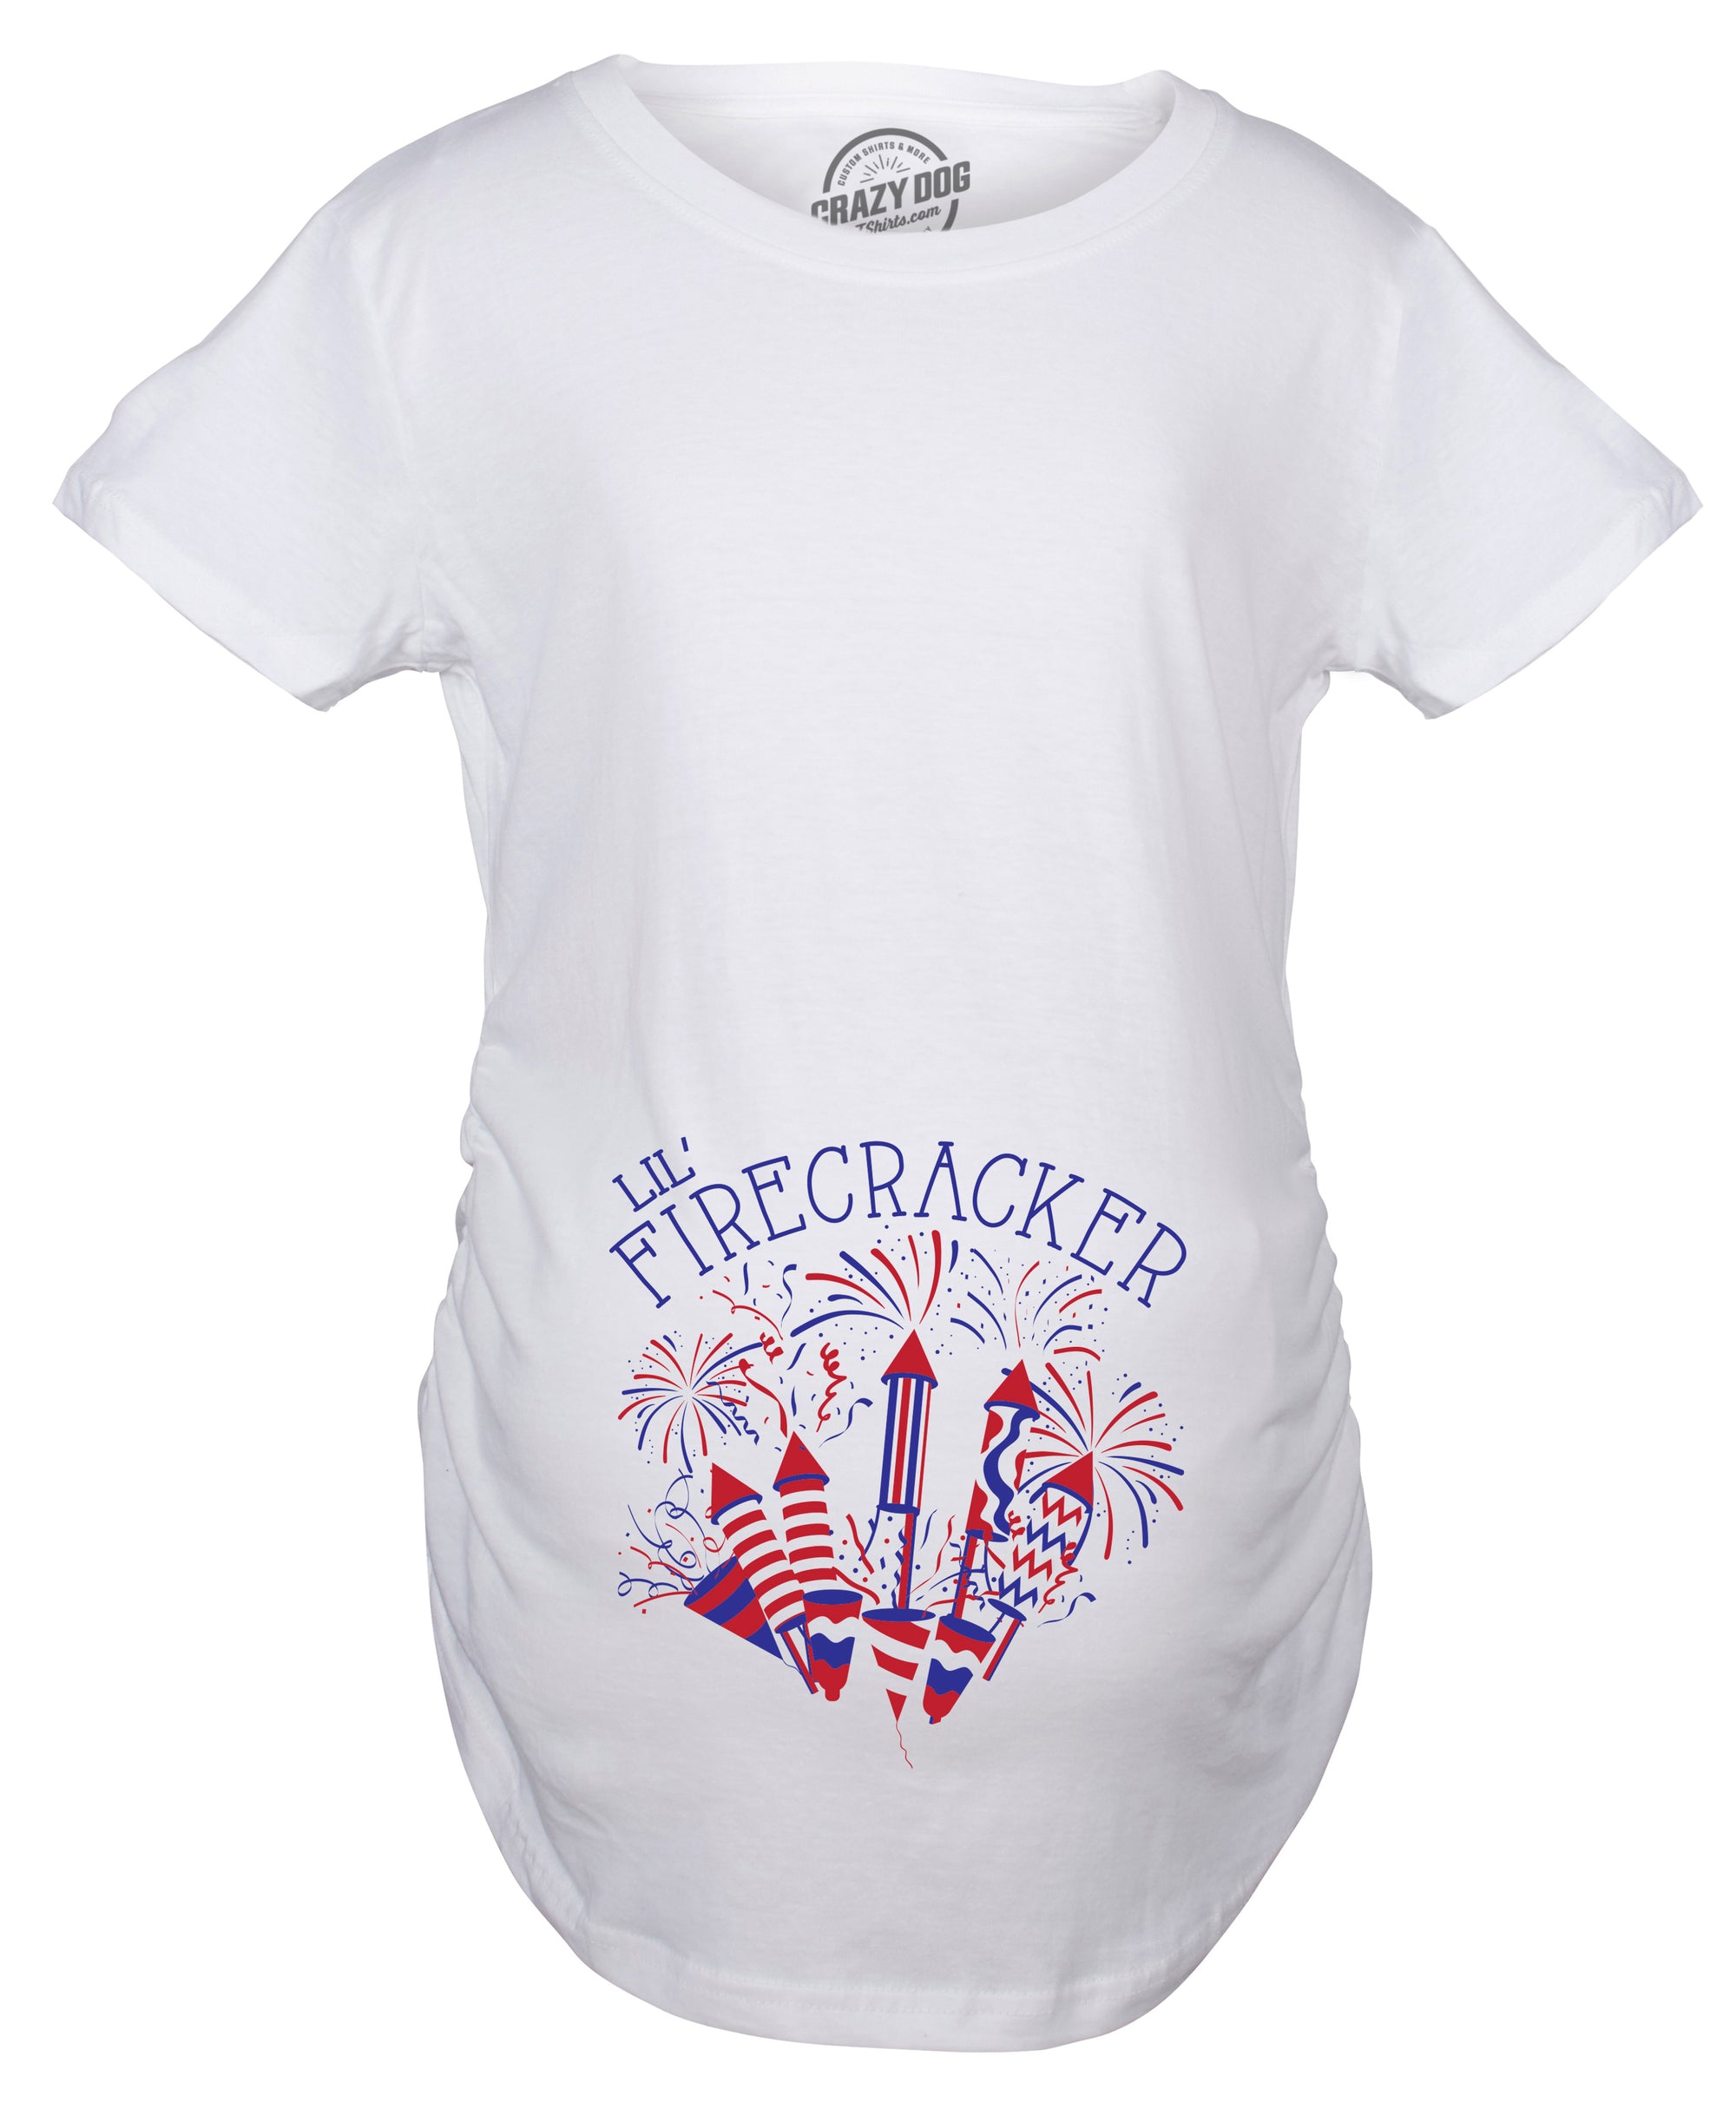 Funny White Lil Firecracker Maternity T Shirt Nerdy Fourth of July Tee